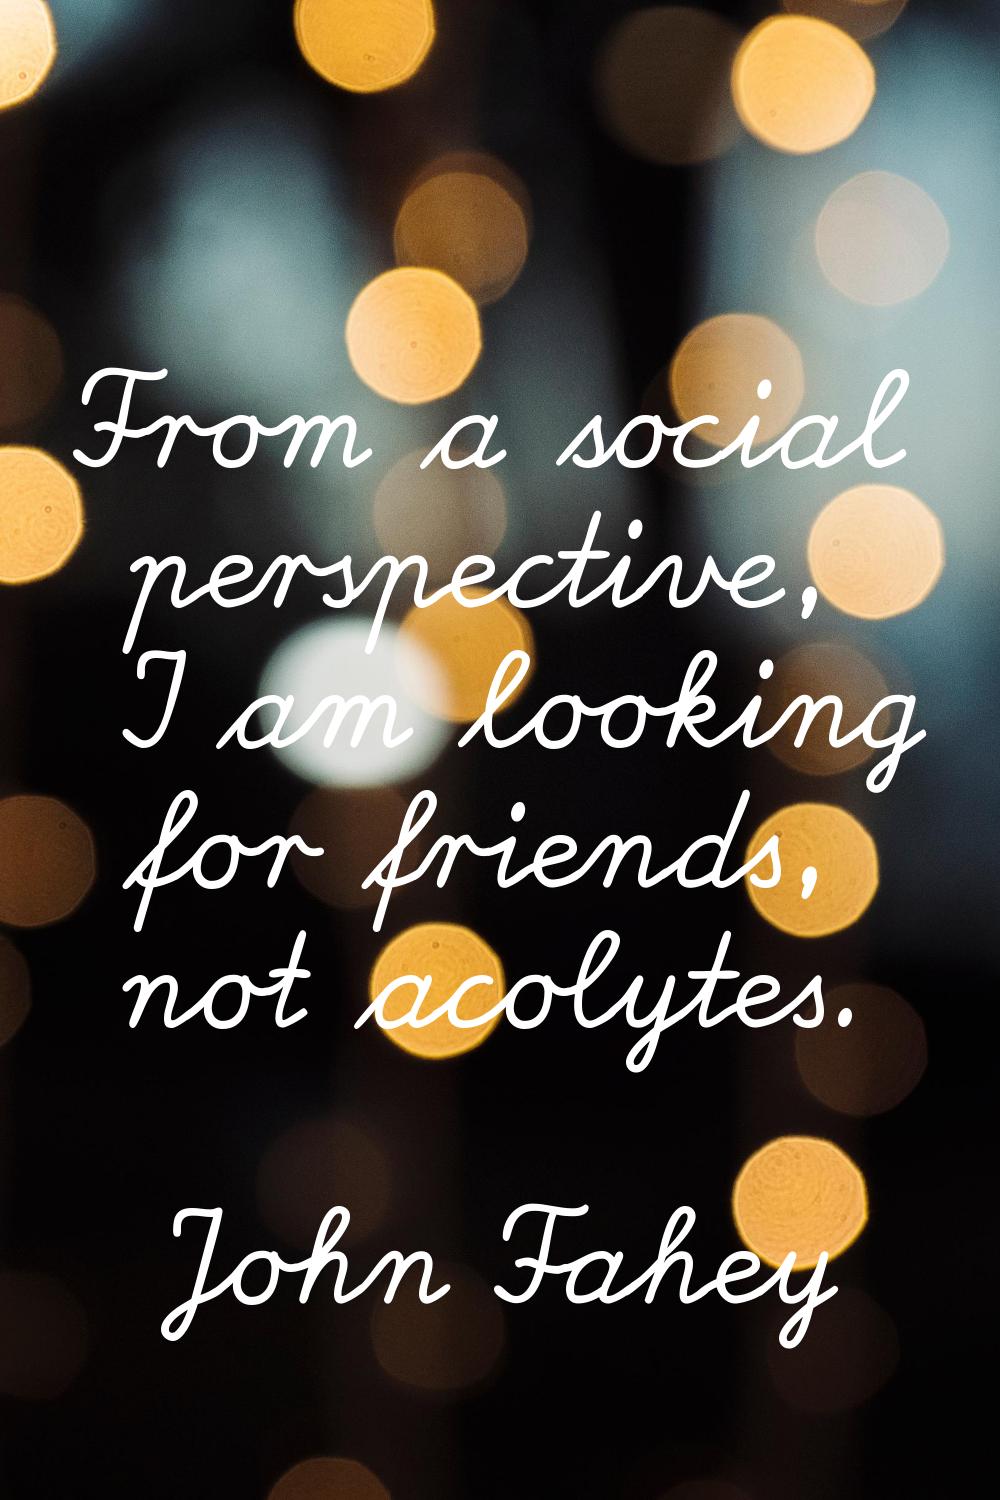 From a social perspective, I am looking for friends, not acolytes.